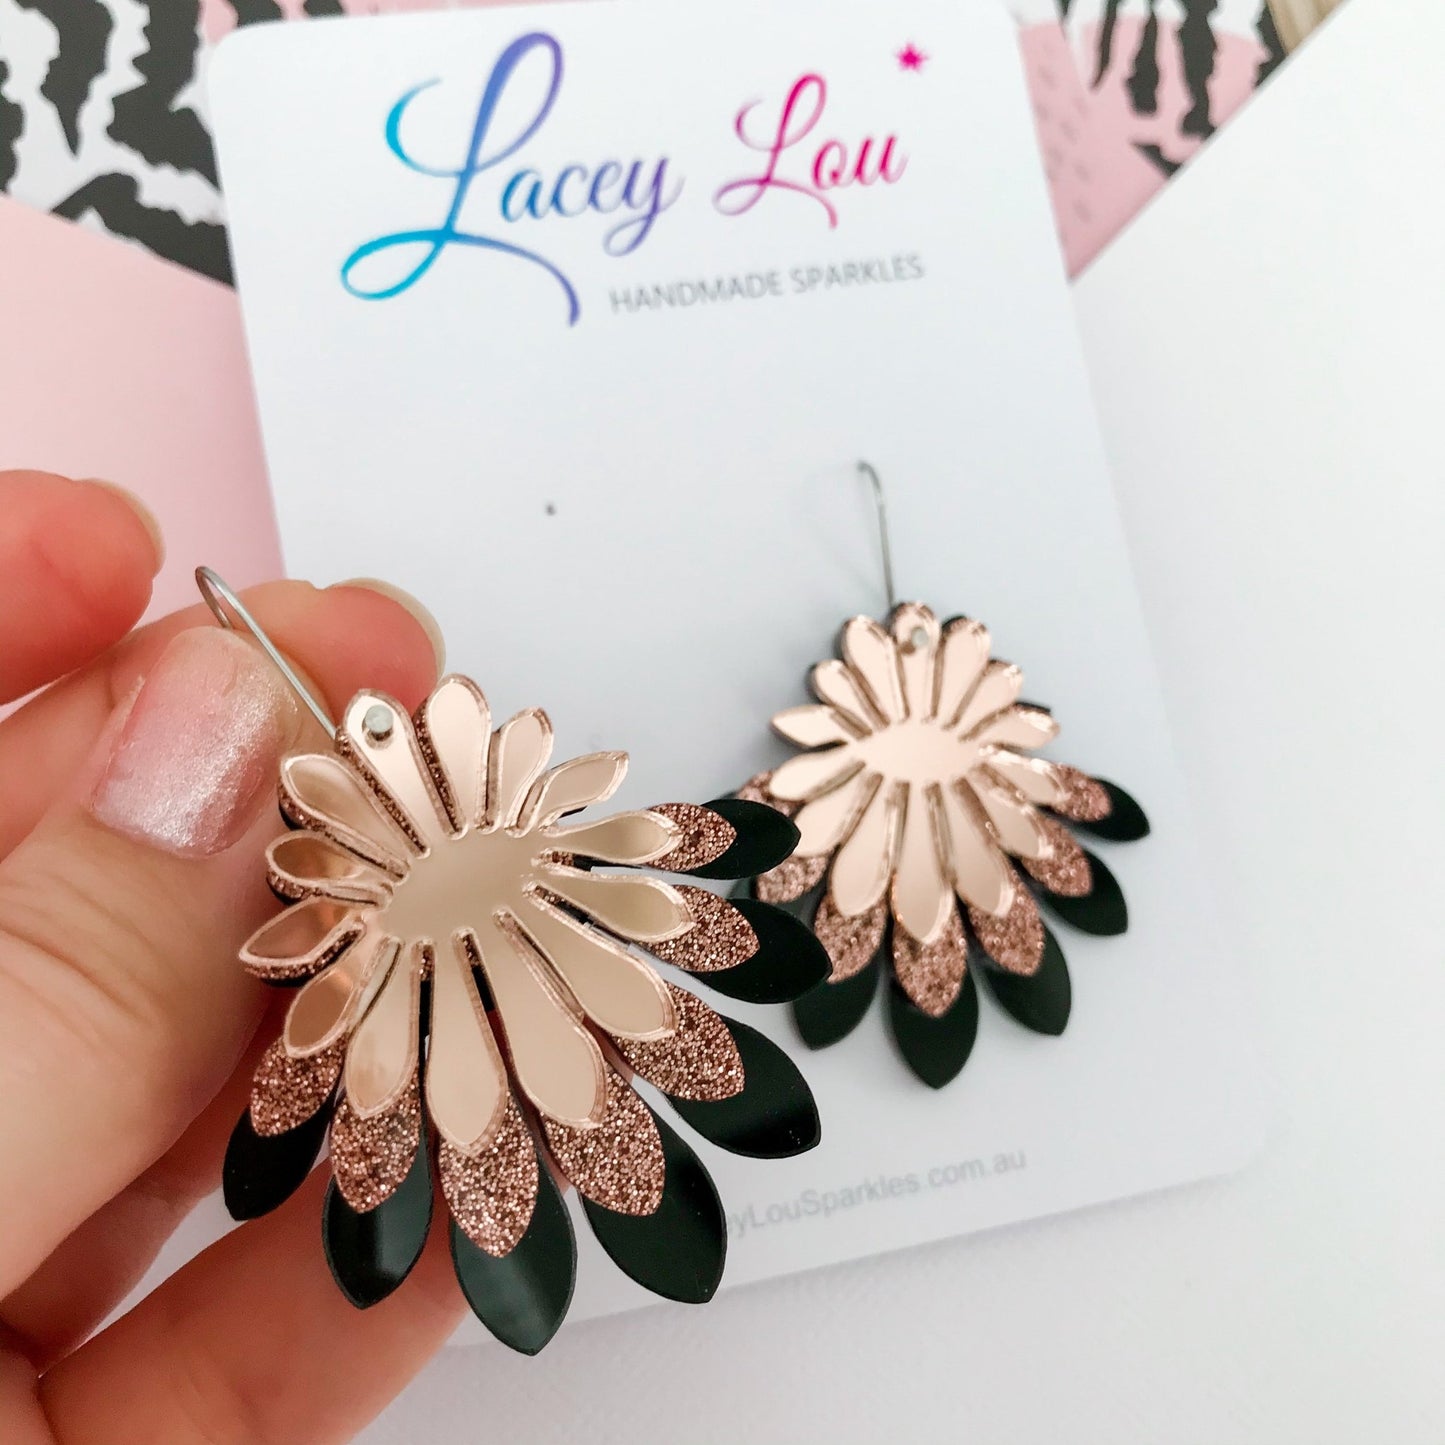 Large Flower Frill Statement Earrings - Black | Bronze | Rose Gold - Lacey Lou Sparkles